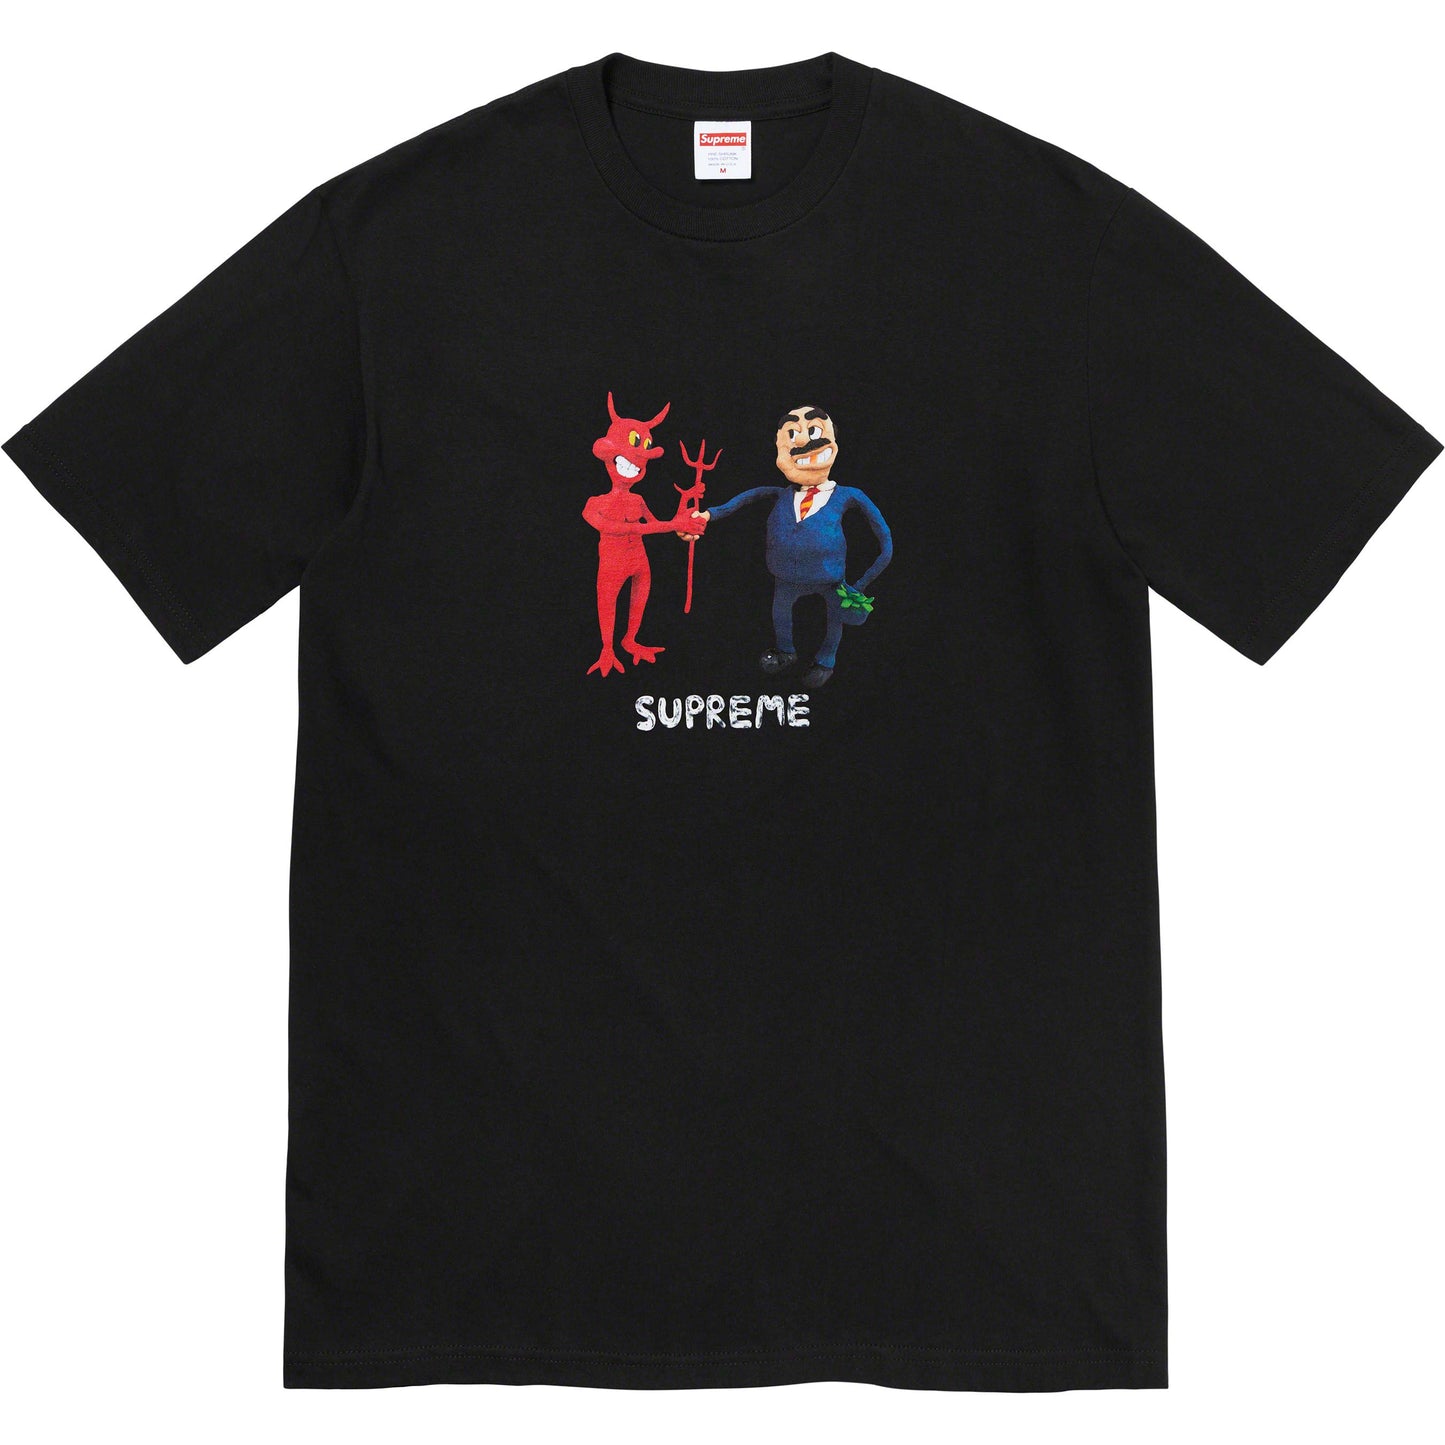 Supreme Business Tee Black from Supreme